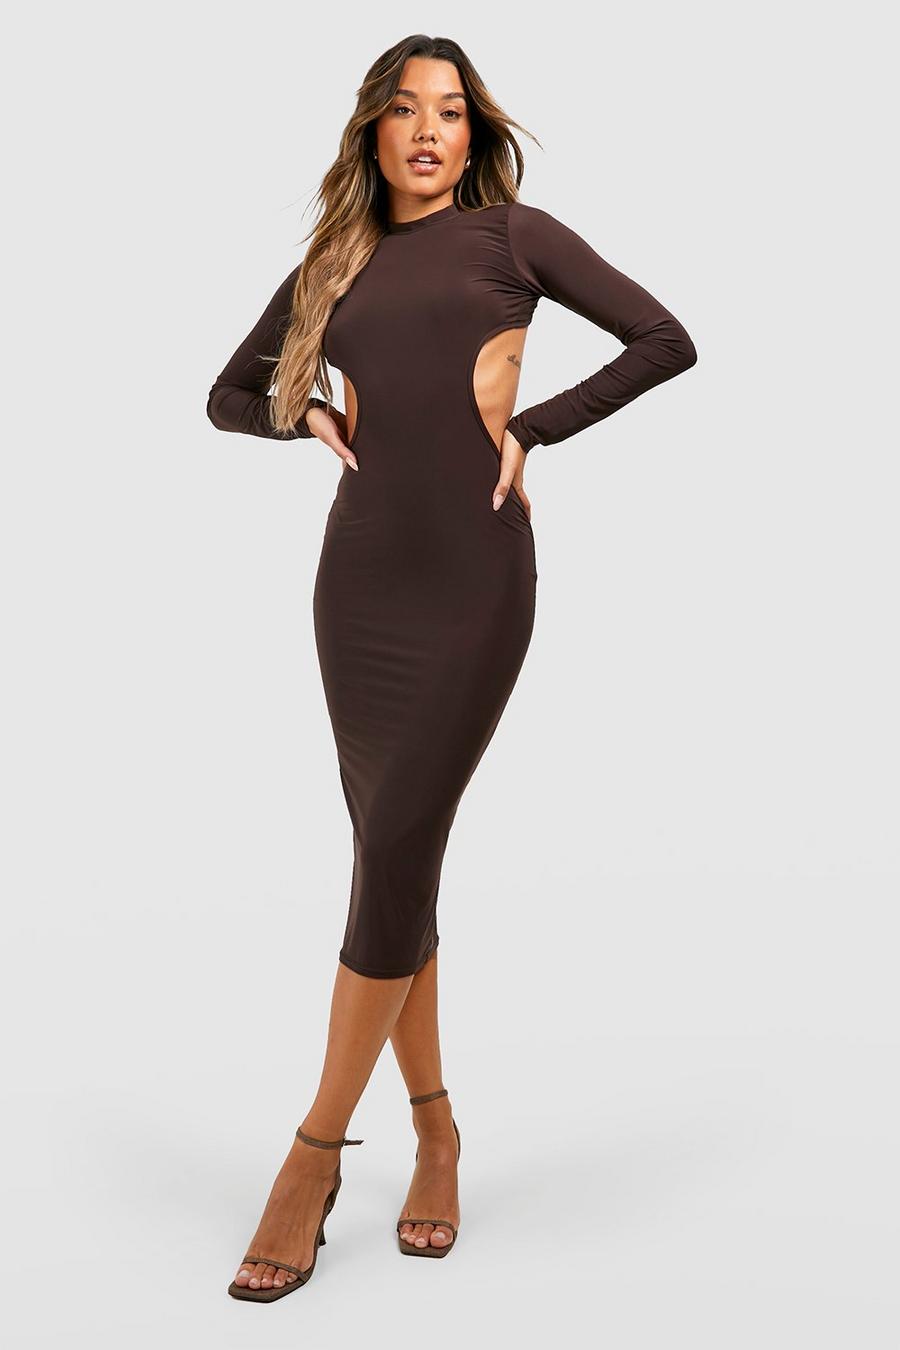 Frontwalk Ladies Bodycon Dresses Backless Mini Dress Solid Color